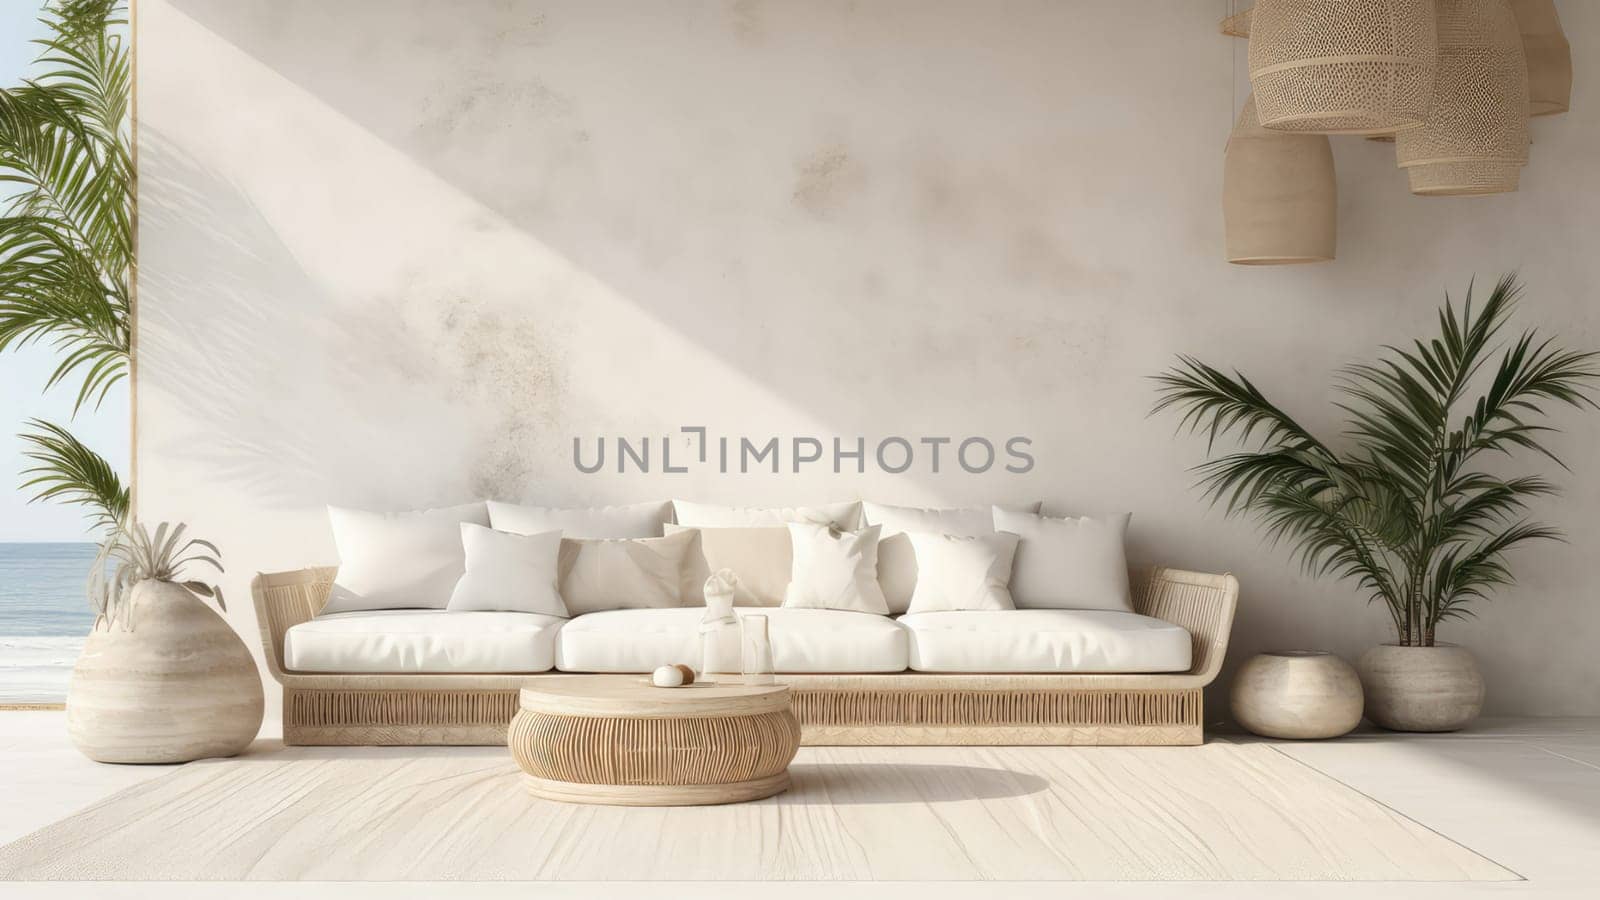 3D rendering interior of a living room with sea view background. by Arissuu1